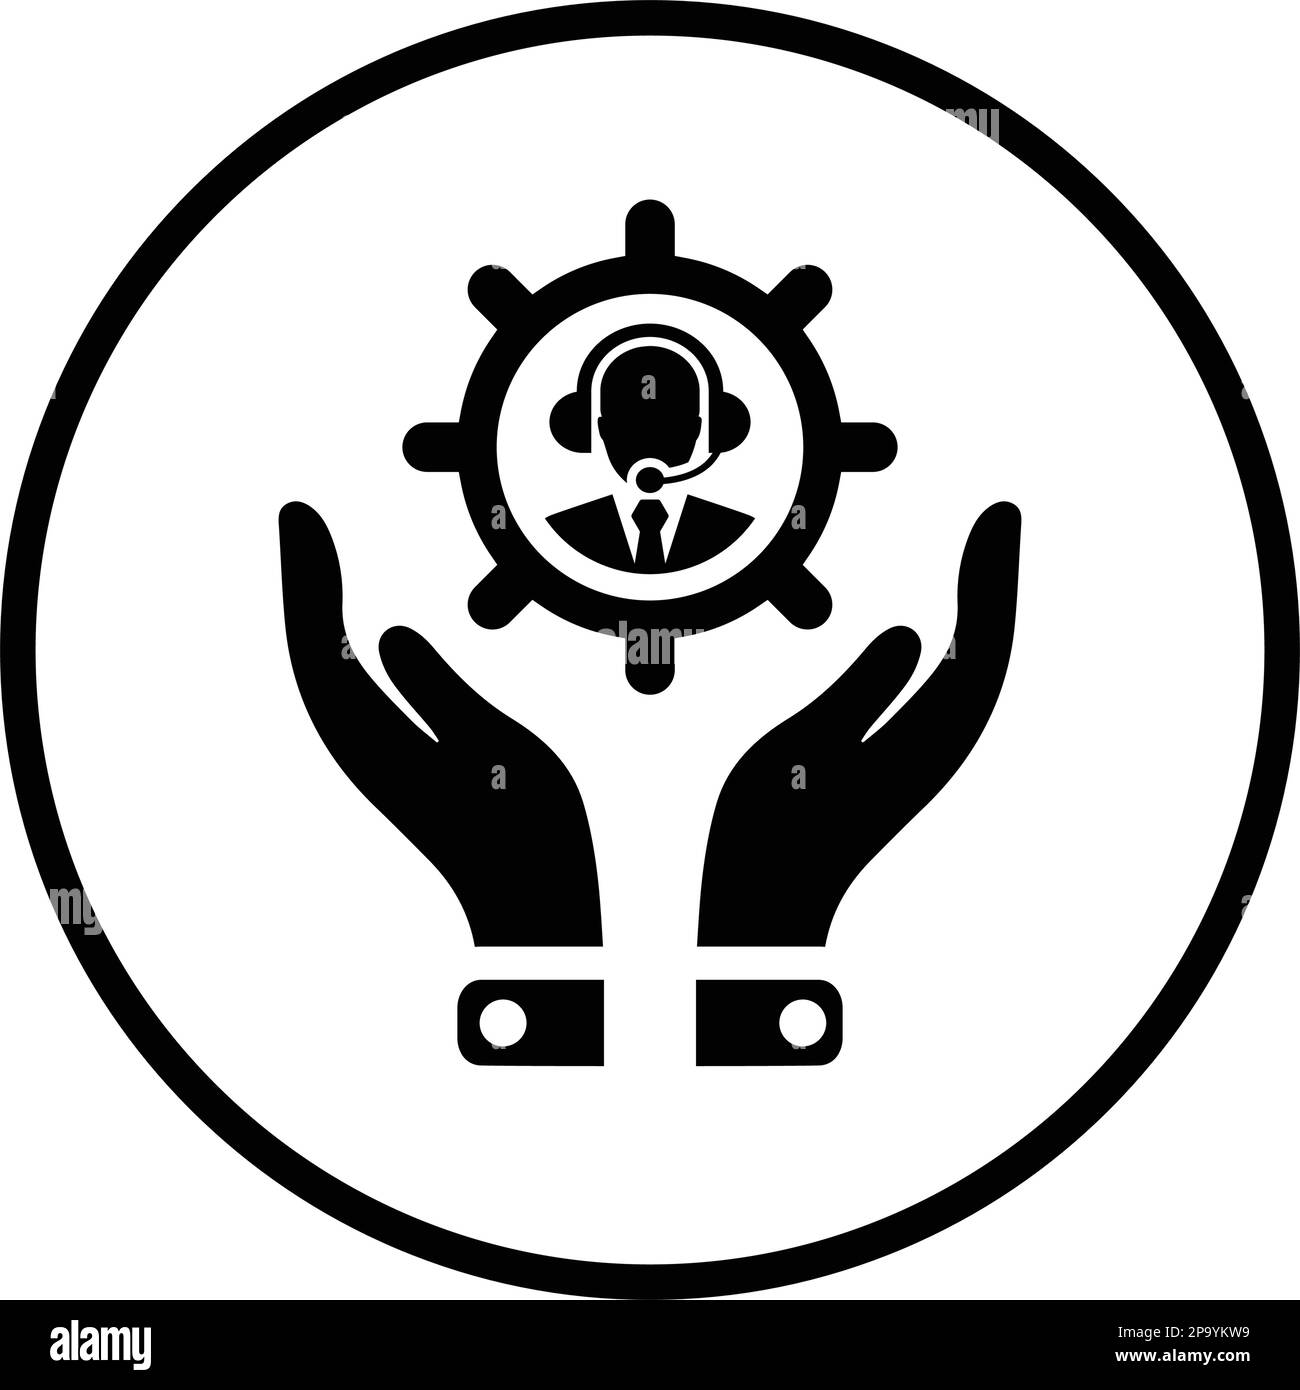 Business Support icon symbol for use on mobile apps, print media and web design or any type of design projects. Stock Vector